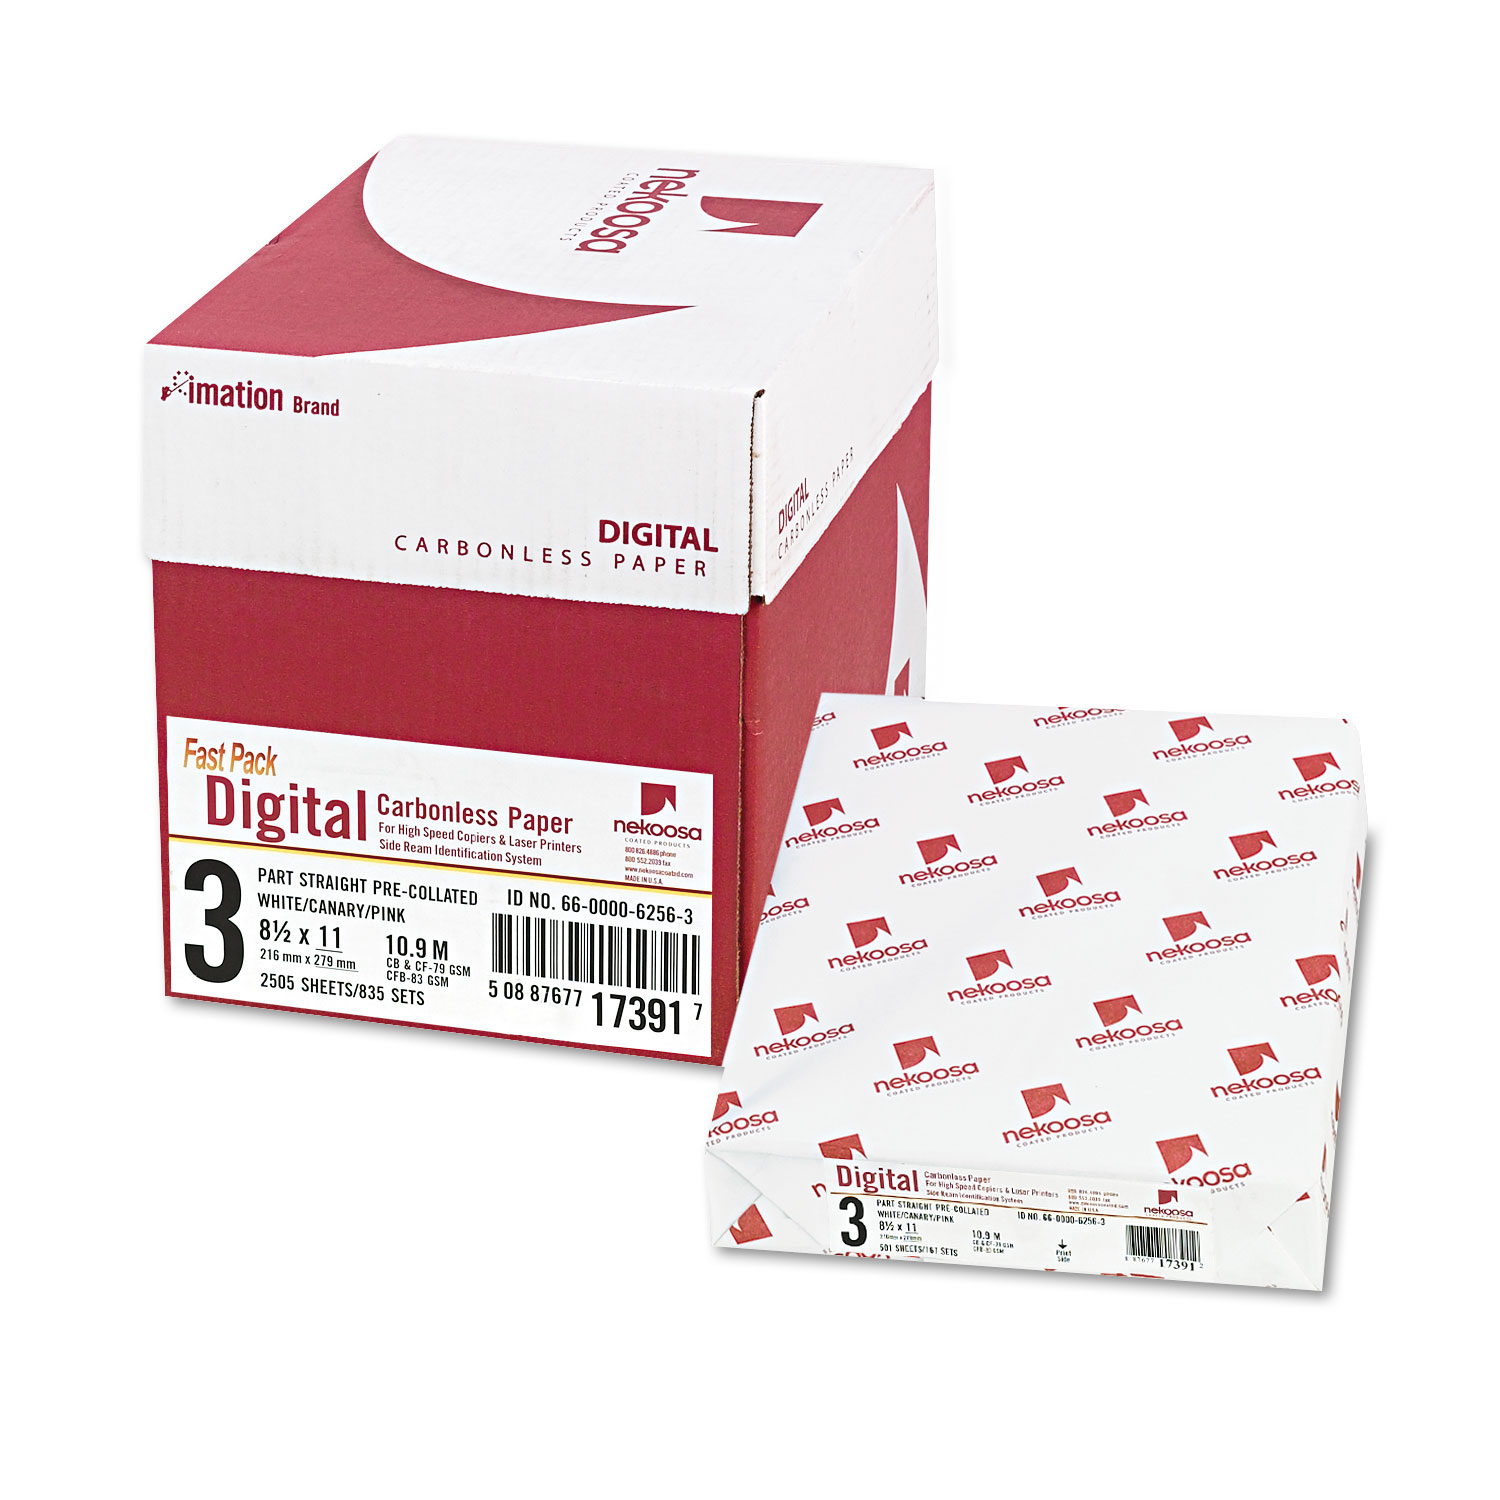 Fast Pack Carbonless 3-Part Paper, 8.5 x 11, White/Canary/Pink, 500 Sheets/Ream, 5 Reams/Carton